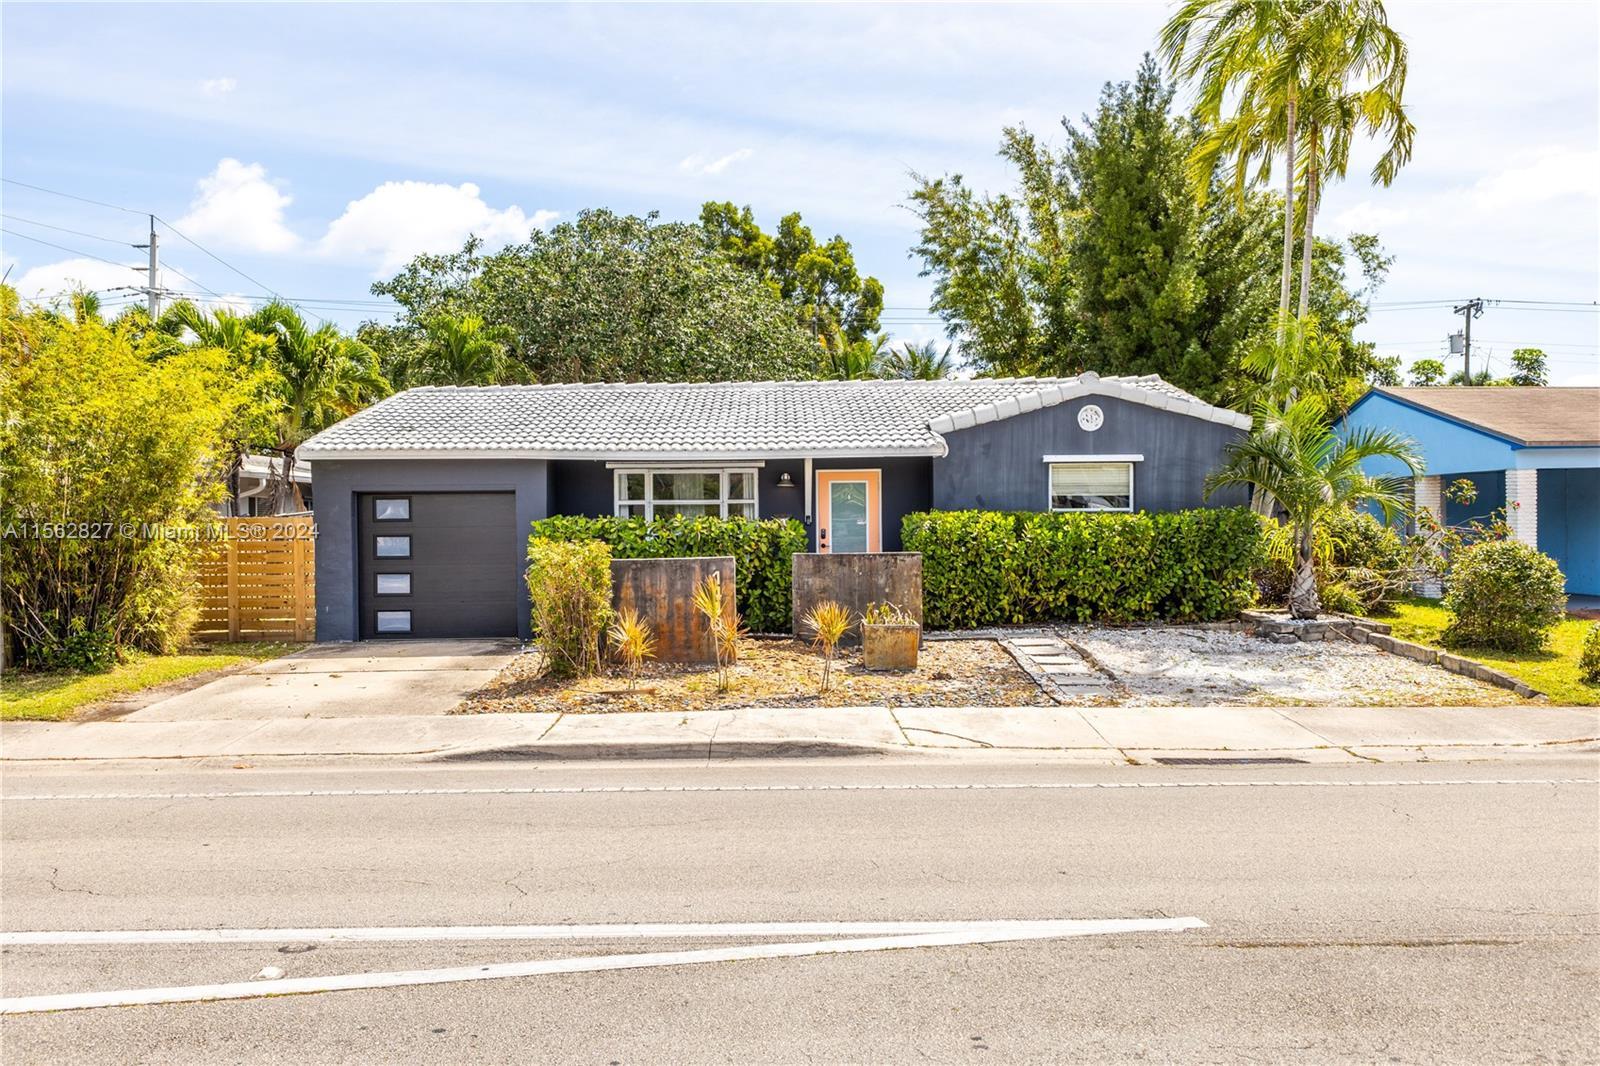 Welcome to this charming 3 bed 2 bath ranch style home, NO HOA in the coveted Poinsettia Heights nei